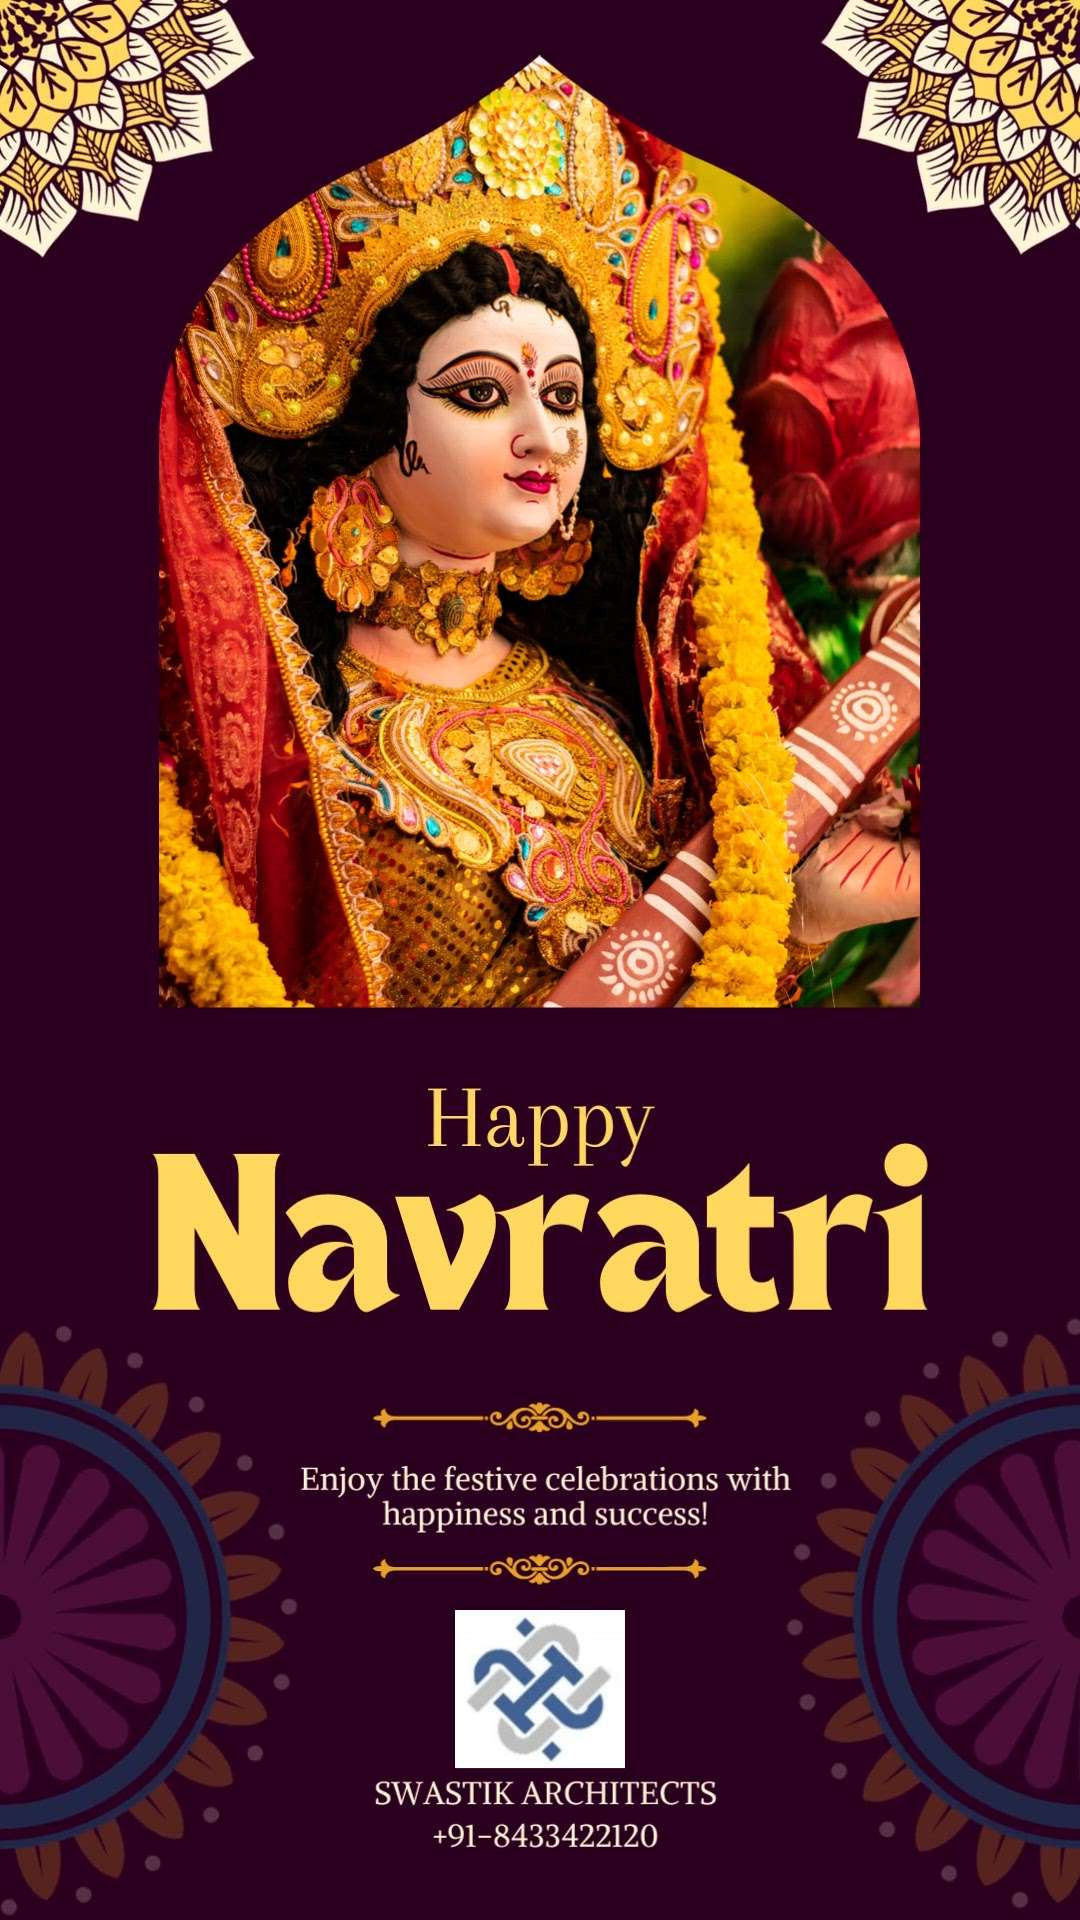 "May this Navratri illuminate your life with joy and prosperity! 🌟

At Swastik architects, we believe in celebrating the festive spirit with you. Our team is dedicated to providing you with top-notch Service that can add a touch of magic to your Navratri celebrations.

This Navratri, let's come together to make your dreams come true. Visit our website or contact us today to explore our exclusive Navratri offers and discounts.

Wishing you a joyful and blessed Navratri! 🙏
-Ar.Somitra Bhardwaj
+91-8433422120 # navratri special